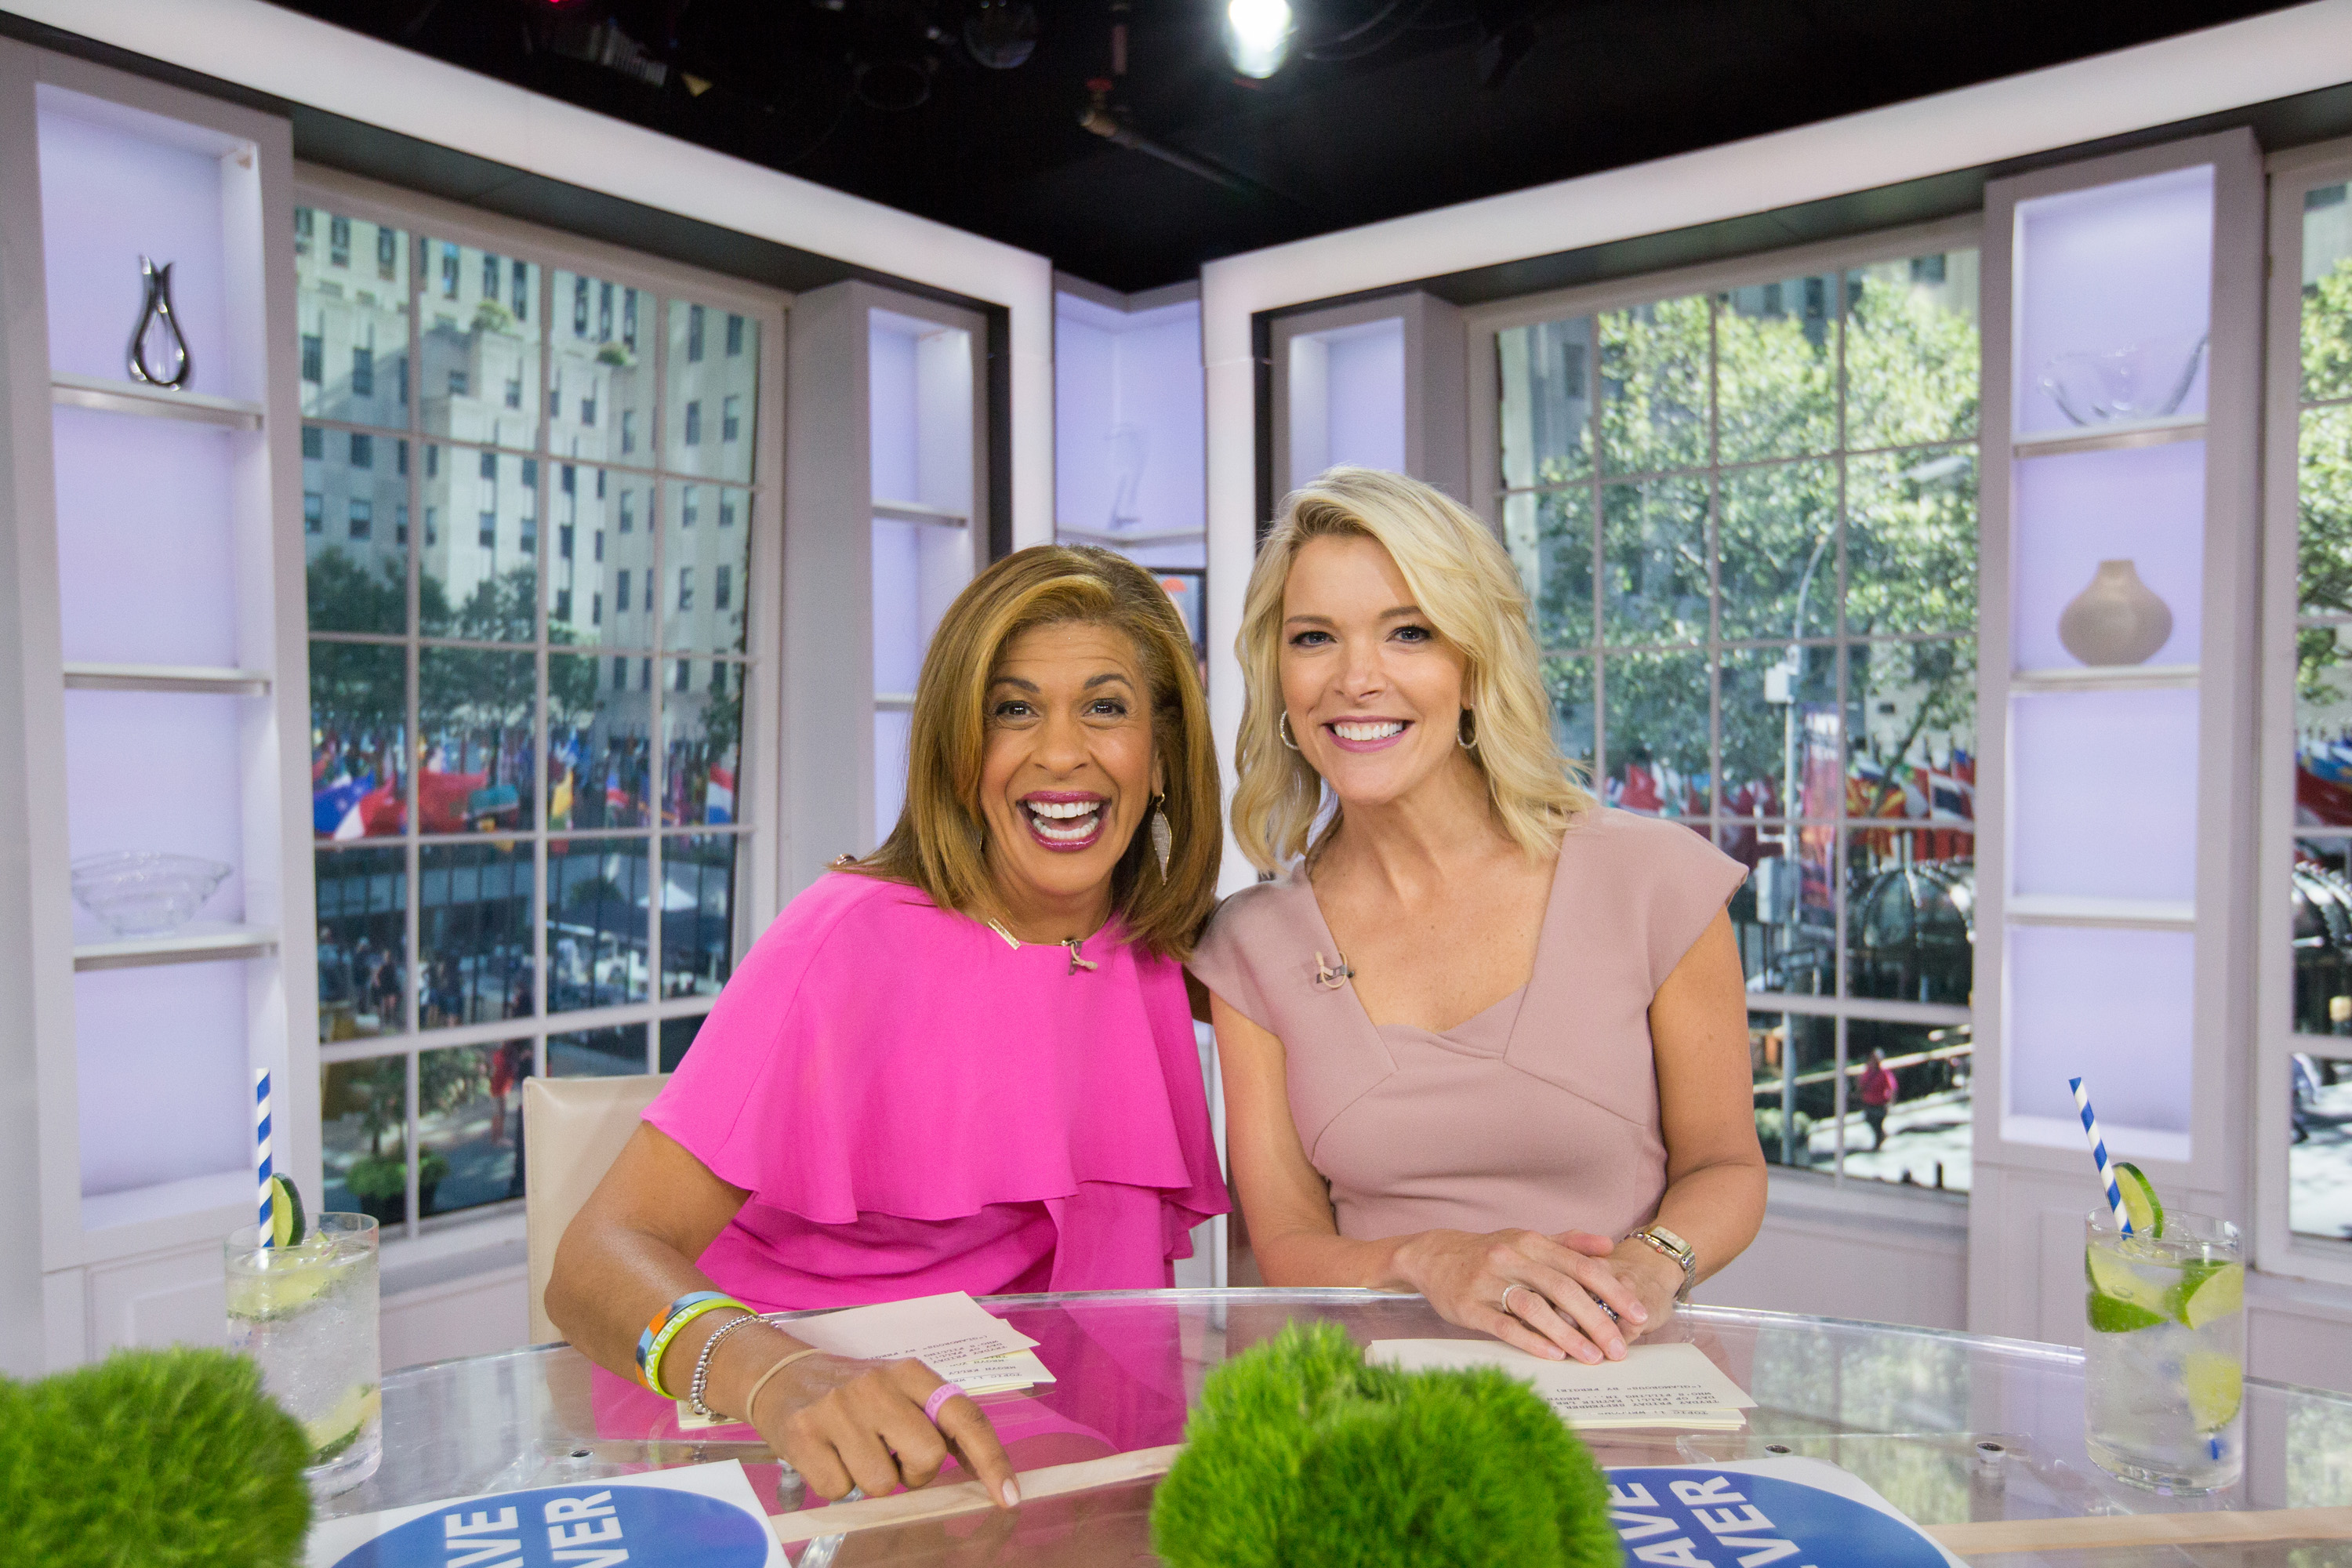 Hoda Kotb and Megyn Kelly on the Today Show on Sept. 22, 2017. (NBCU/Getty Images)